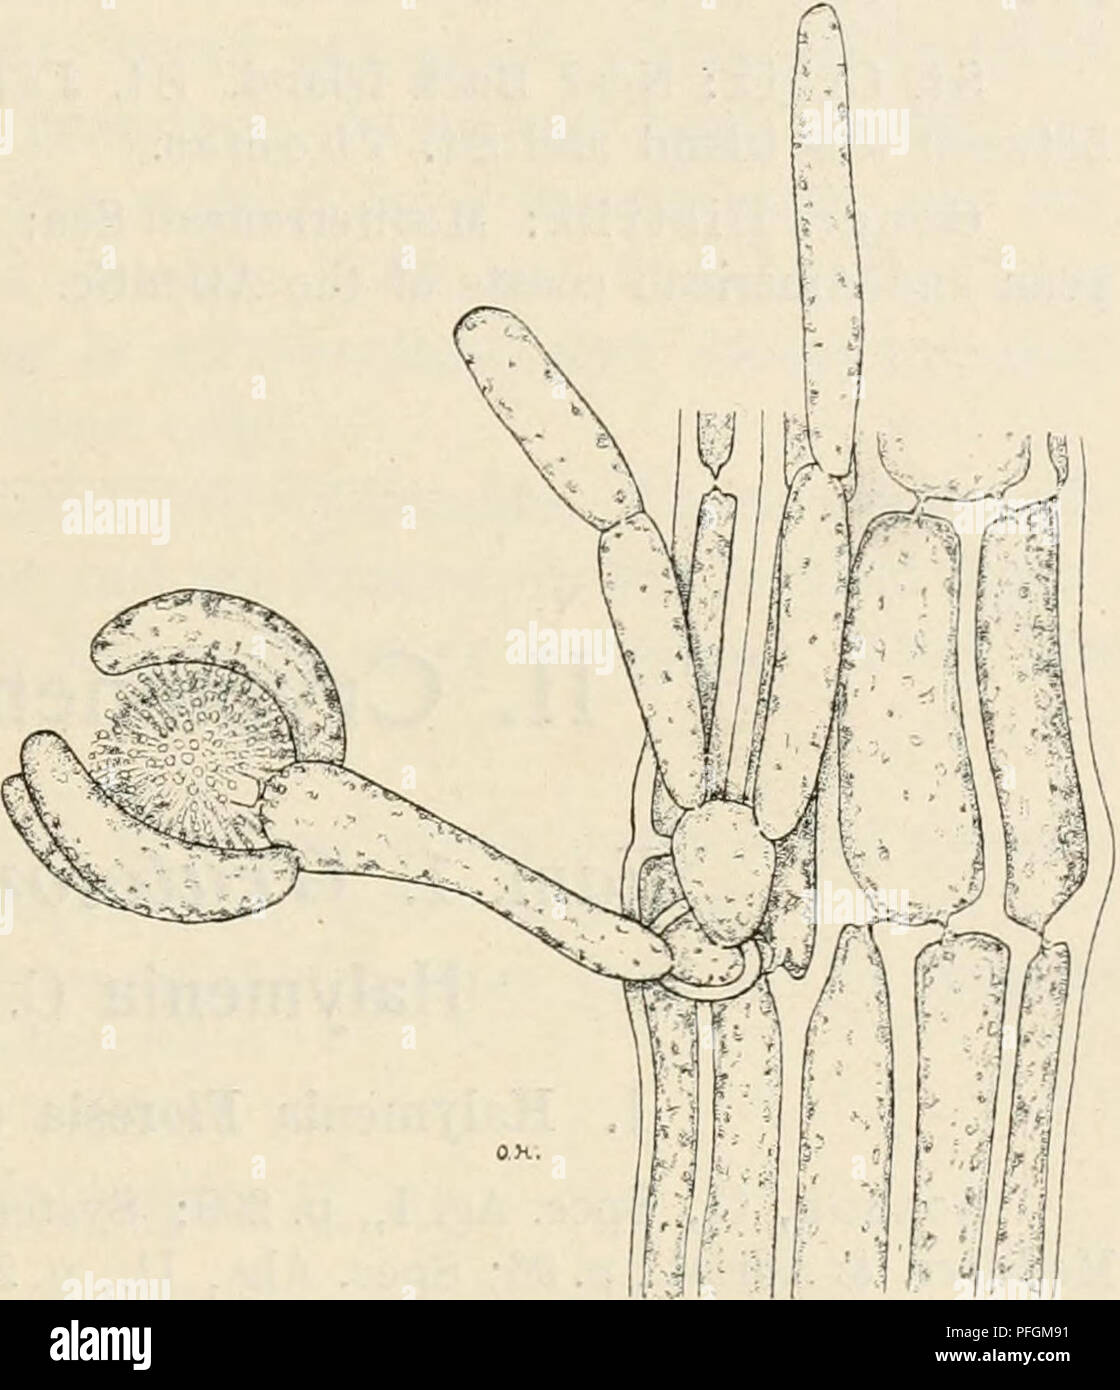 . Dansk botanisk arkiv. Plants; Plants -- Denmark. F. Børgesen: Rhodophyceæ of the Danish W. Indies. 121 All the larger filaments are covered with a cortical layer (comp. Fig. 132) formed by the rhizoids growing out from the base of the branchlets; in the young parts of the branches this cortical layer is not yet developed. The tetrasporangia (Fig. 131) of wdiich Derbes et Solier, 1. c, pi. 18, flg. 7, give a figure are placed terminally upon the short ramuli. The cells from w^hich the tetrasporangia originate give rise also to some short filaments which are more or less curved round the tetra Stock Photo